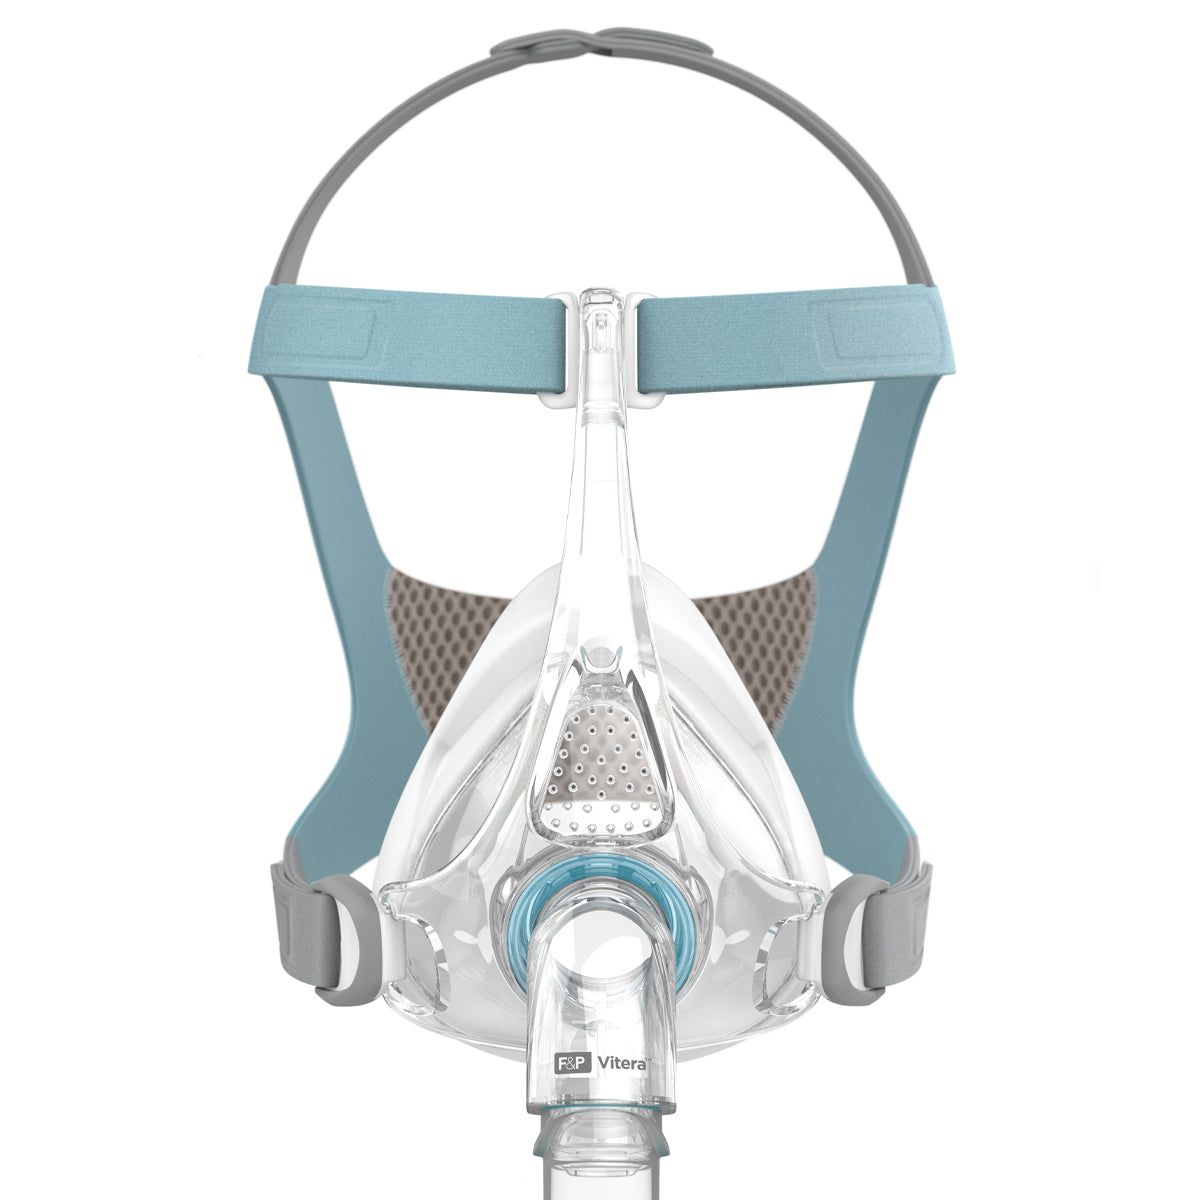 F&P Vitera Full Face CPAP/BiPAP Mask FitPack with Headgear